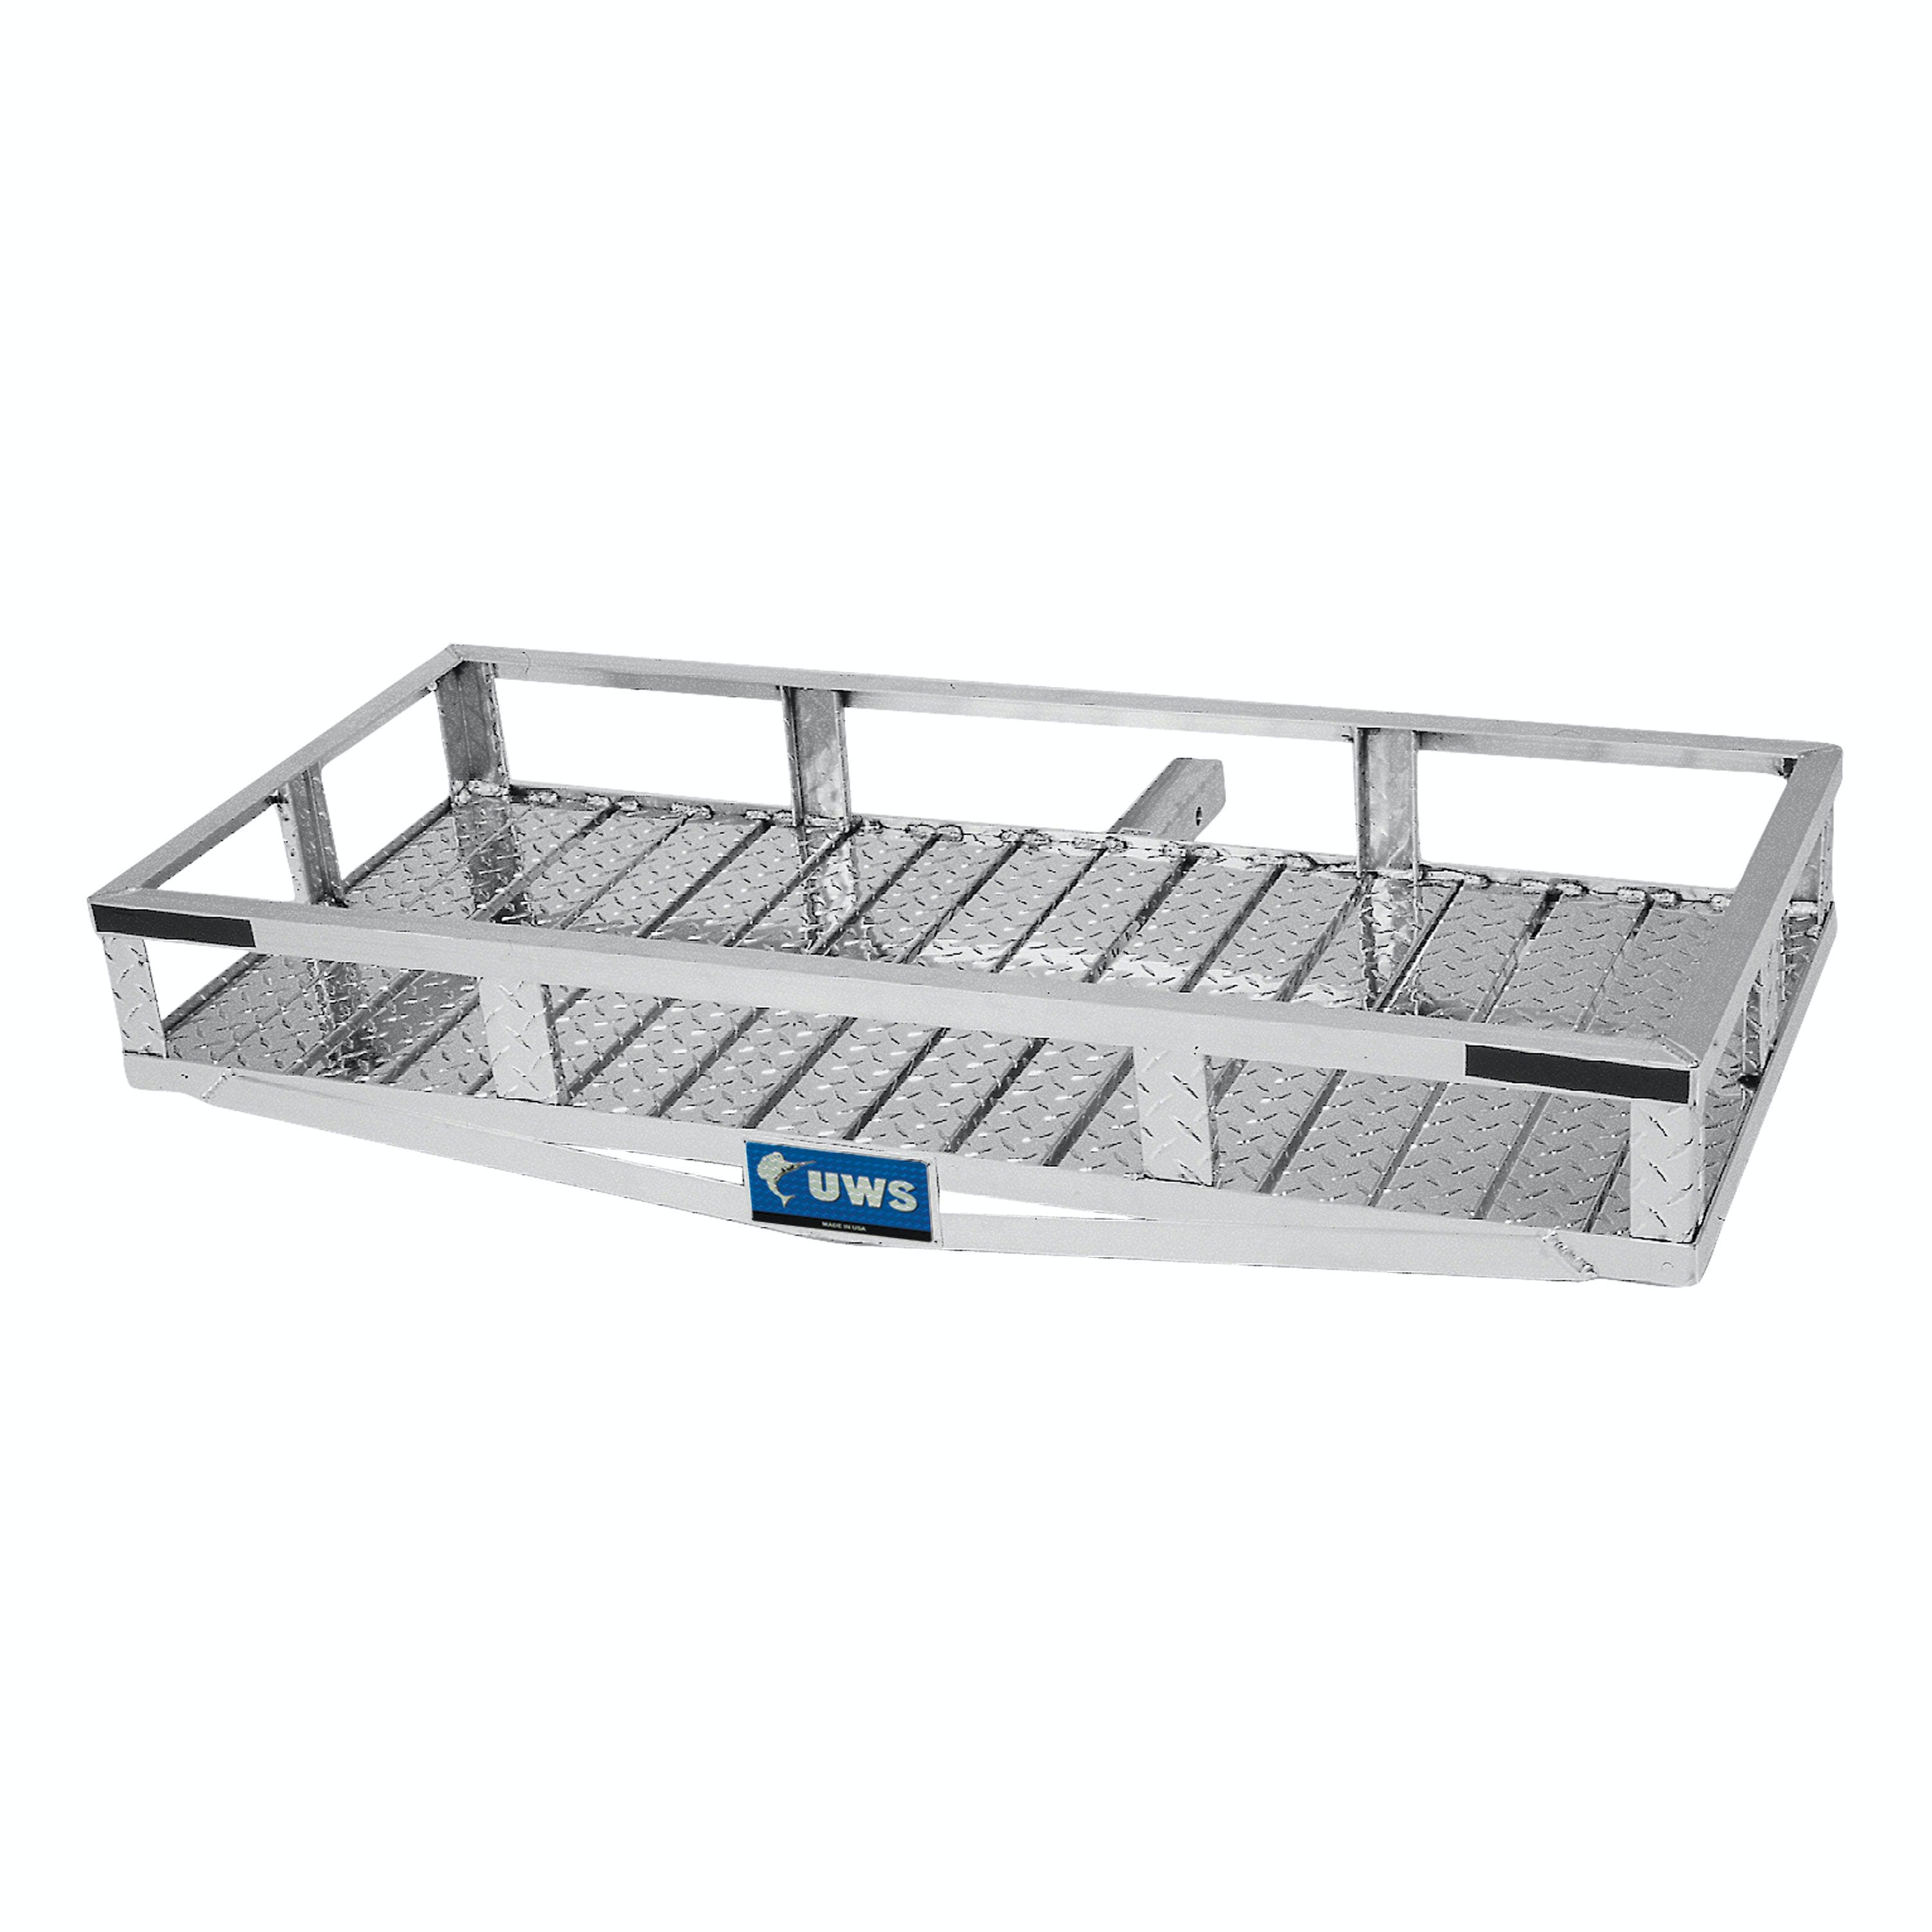 UWS UWS-CARRIER 51 inch X 23 inch Cargo Carrier Fits 2 inch Receivers